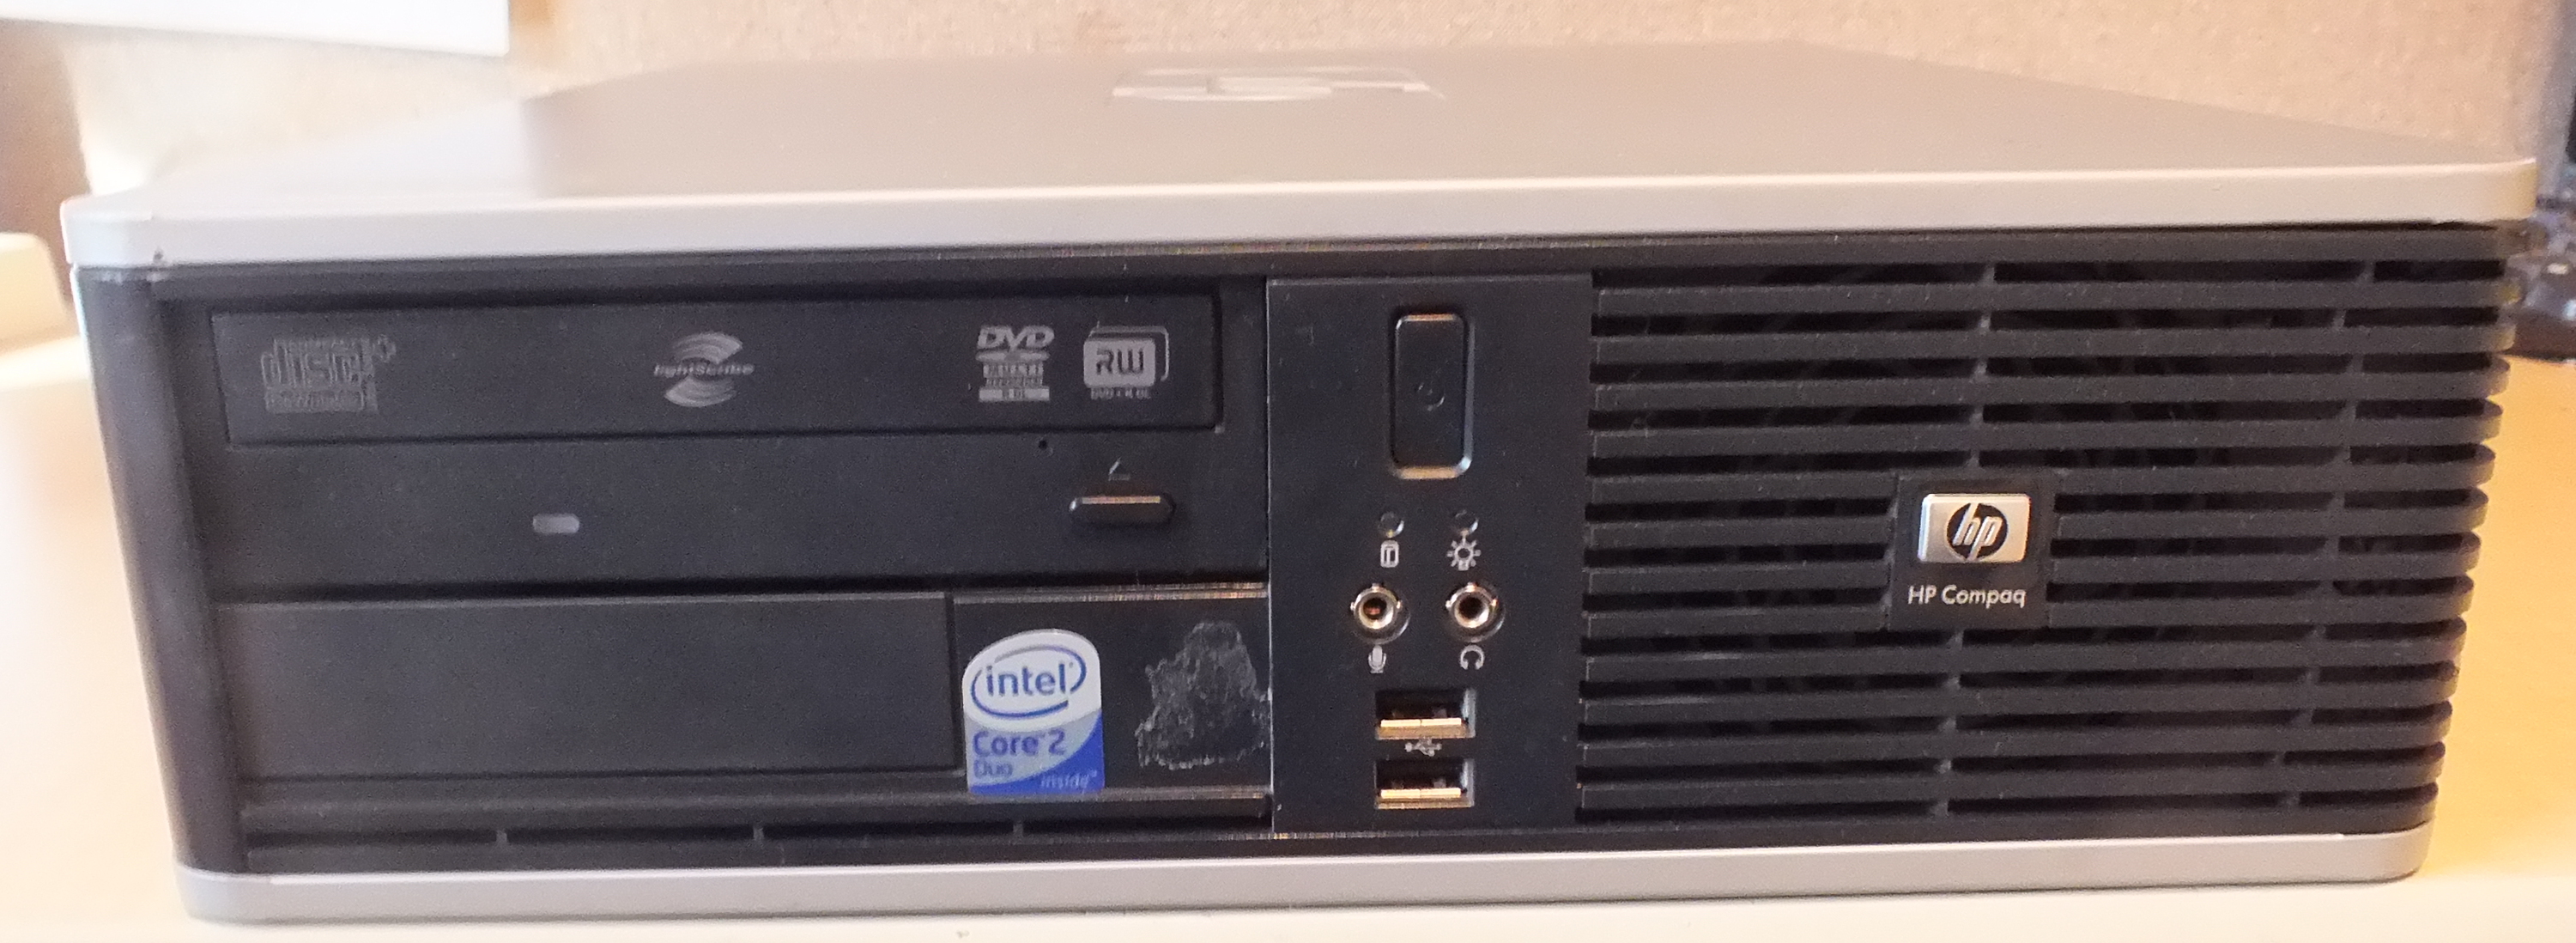 Refurbished Hp Compaq Dc5800 Available Ge Computing And Internet Service